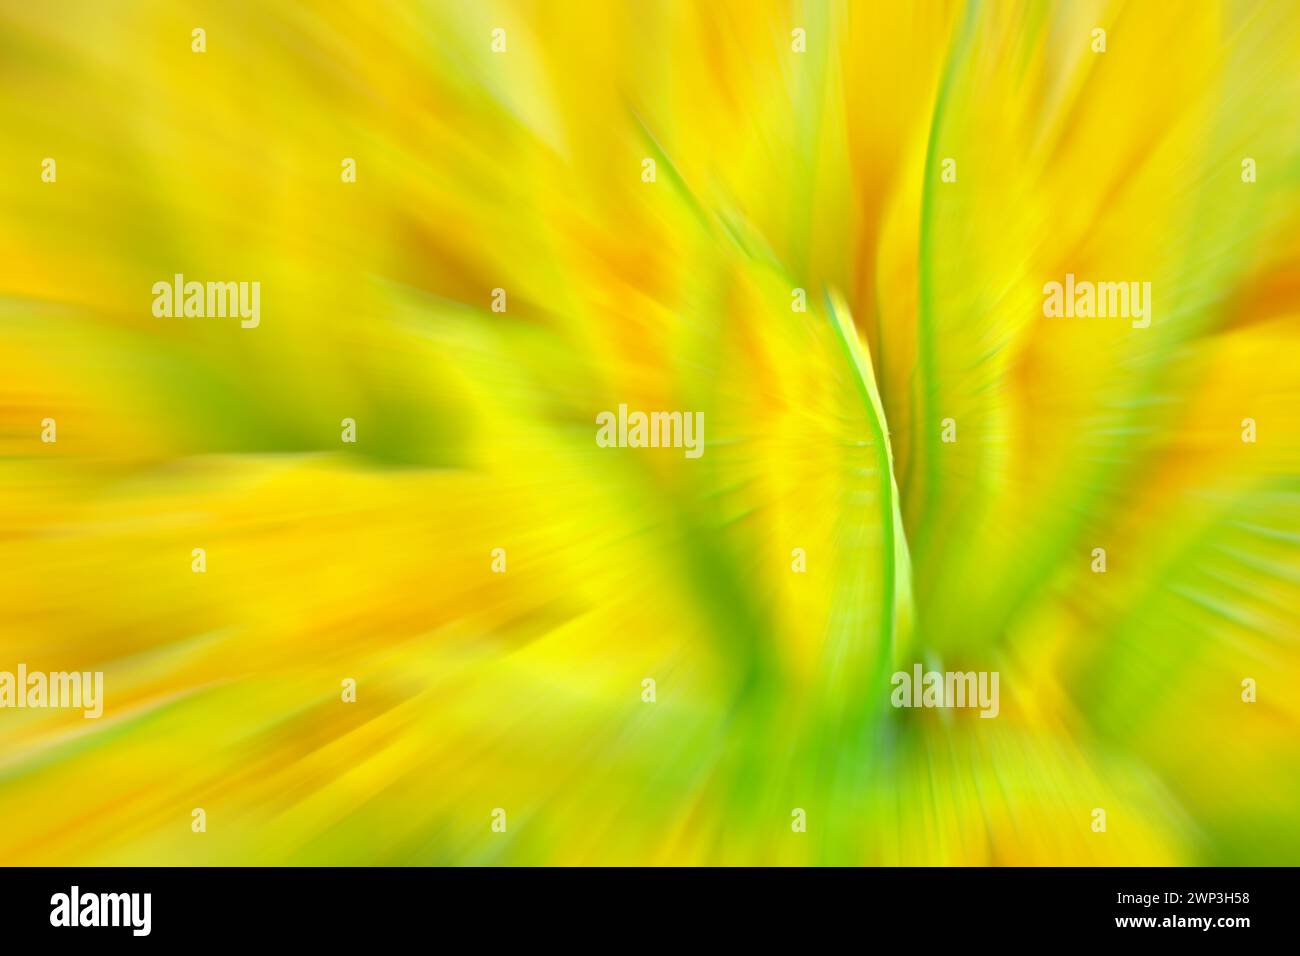 Blurred photo of green and yellow flowers, abstract colorful background or wallpaper. Stock Photo